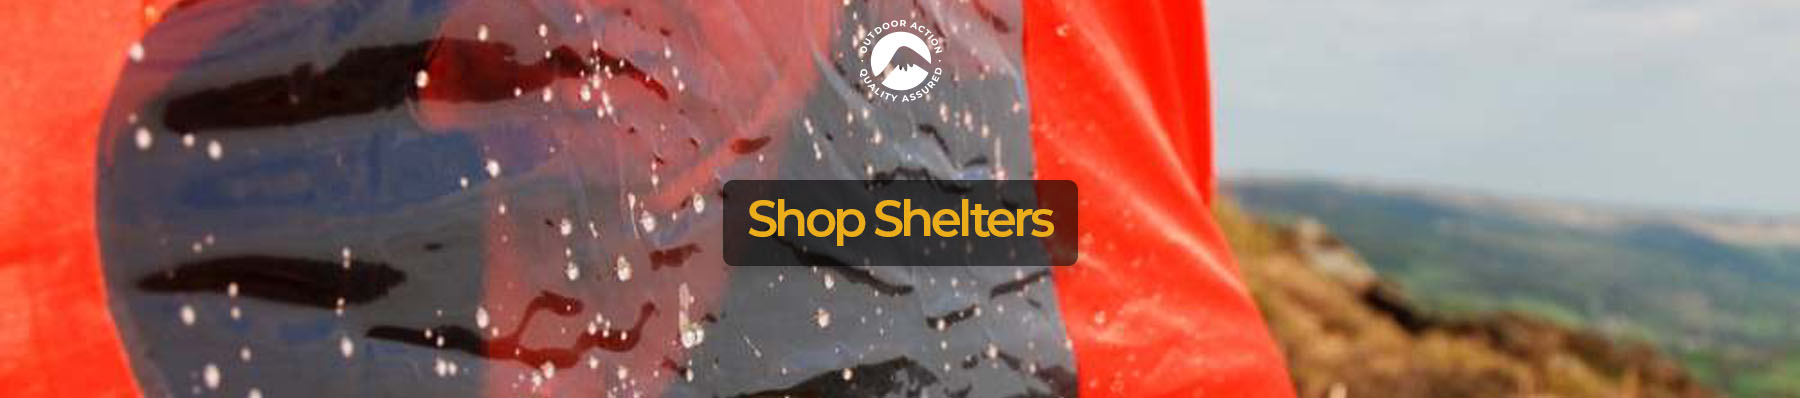 Shop Shelters online at Outdoor Action